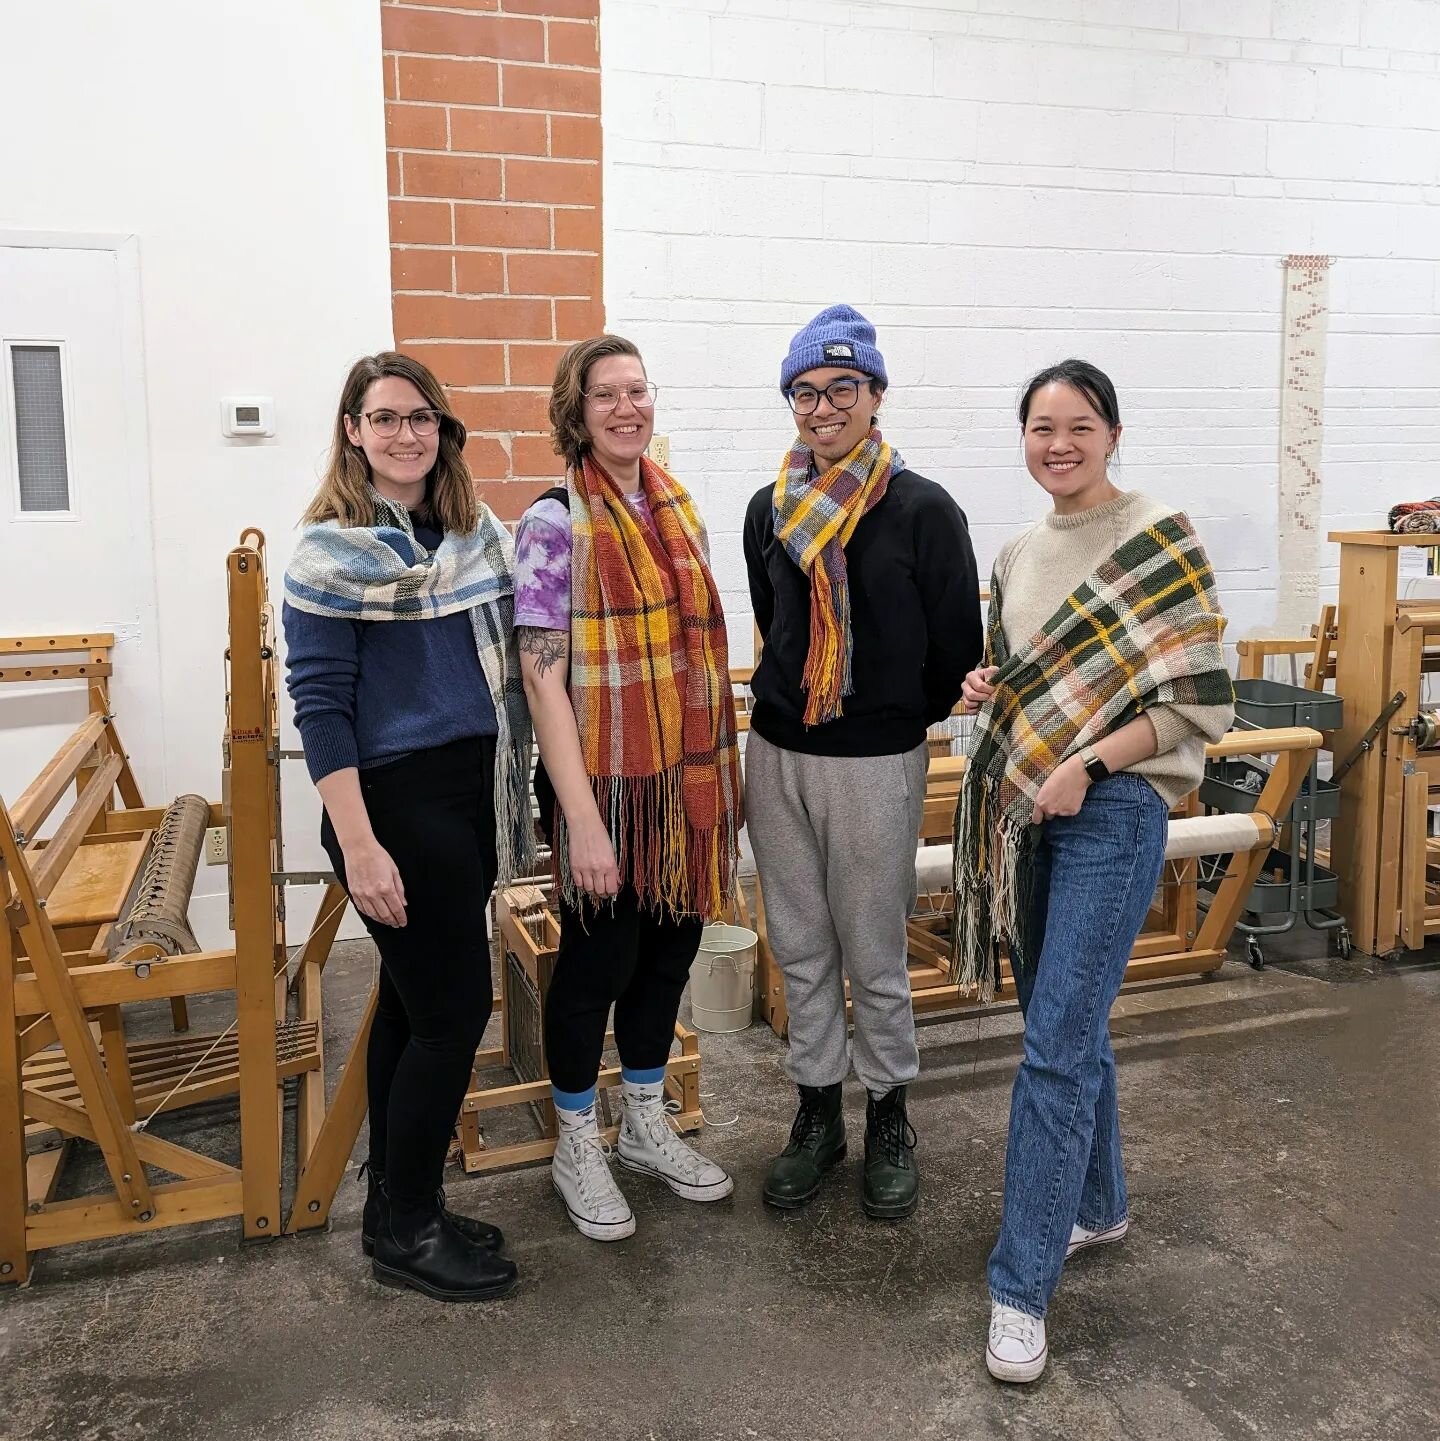 I really enjoyed teaching this group of friends. What an amazing way to share a weekend together!
Swipe to watch them in action weaving their scarves on table looms.
You will enjoy a quirky and funny testimonial from @dame.rensbury

Thanks for sharin